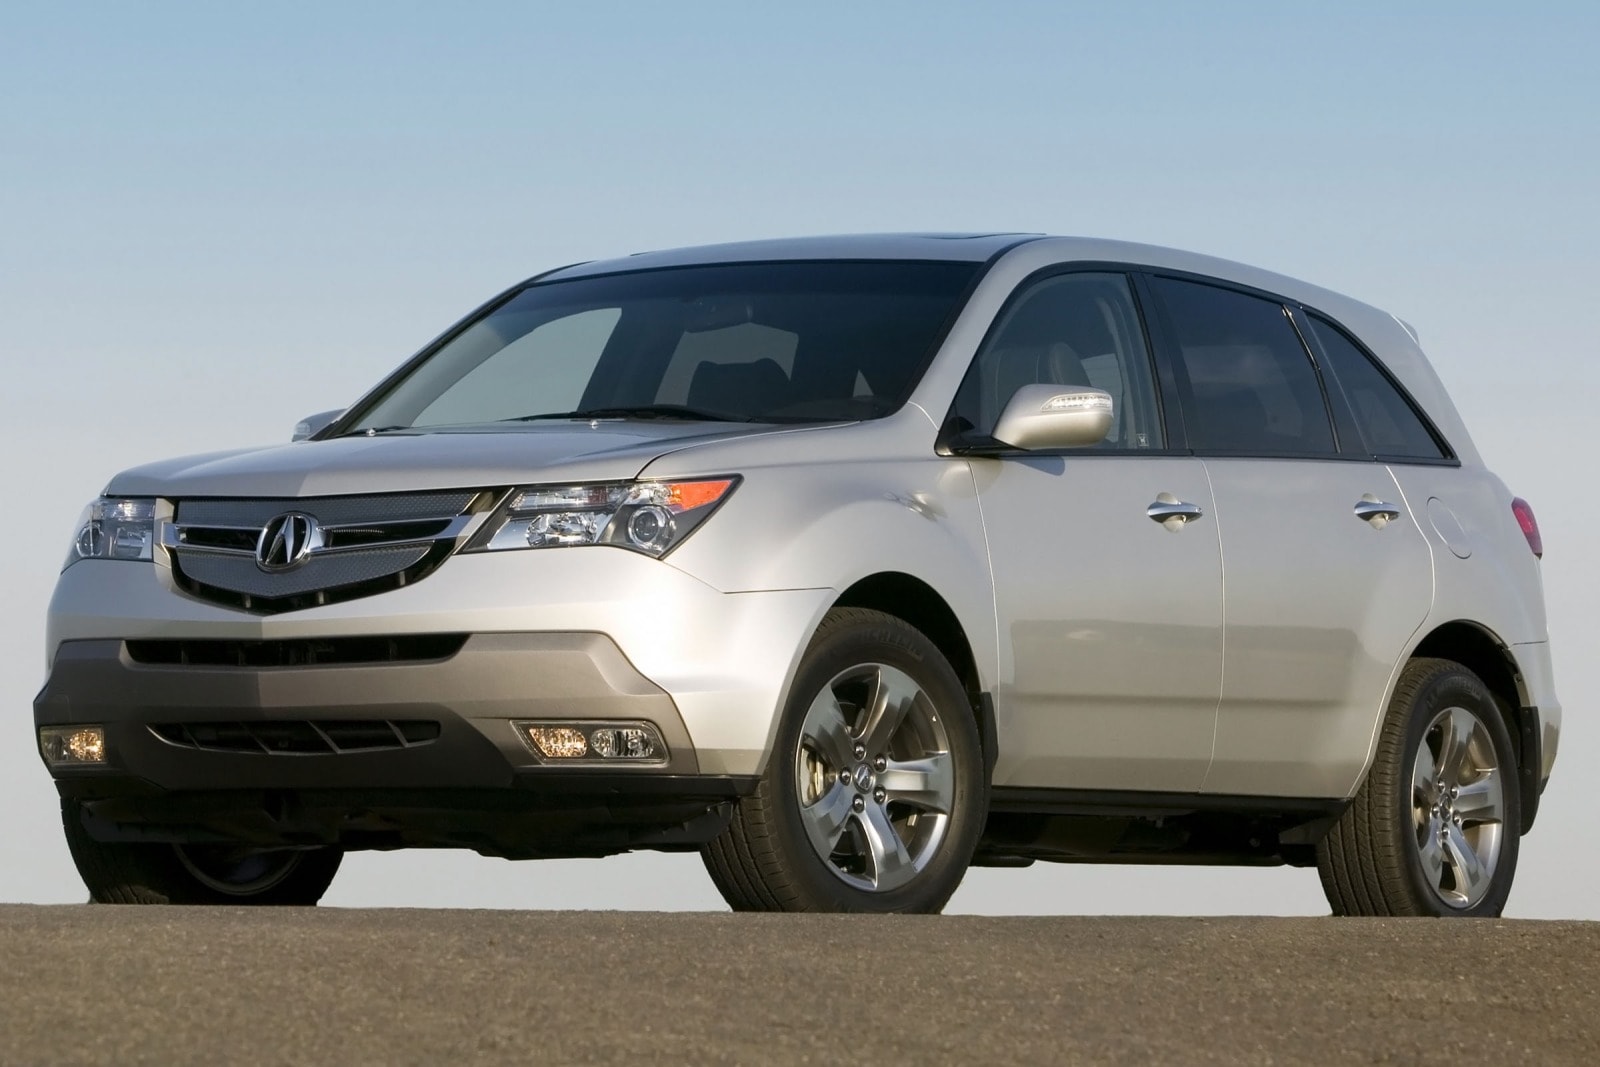 2007 Acura MDX Review & Ratings | Edmunds